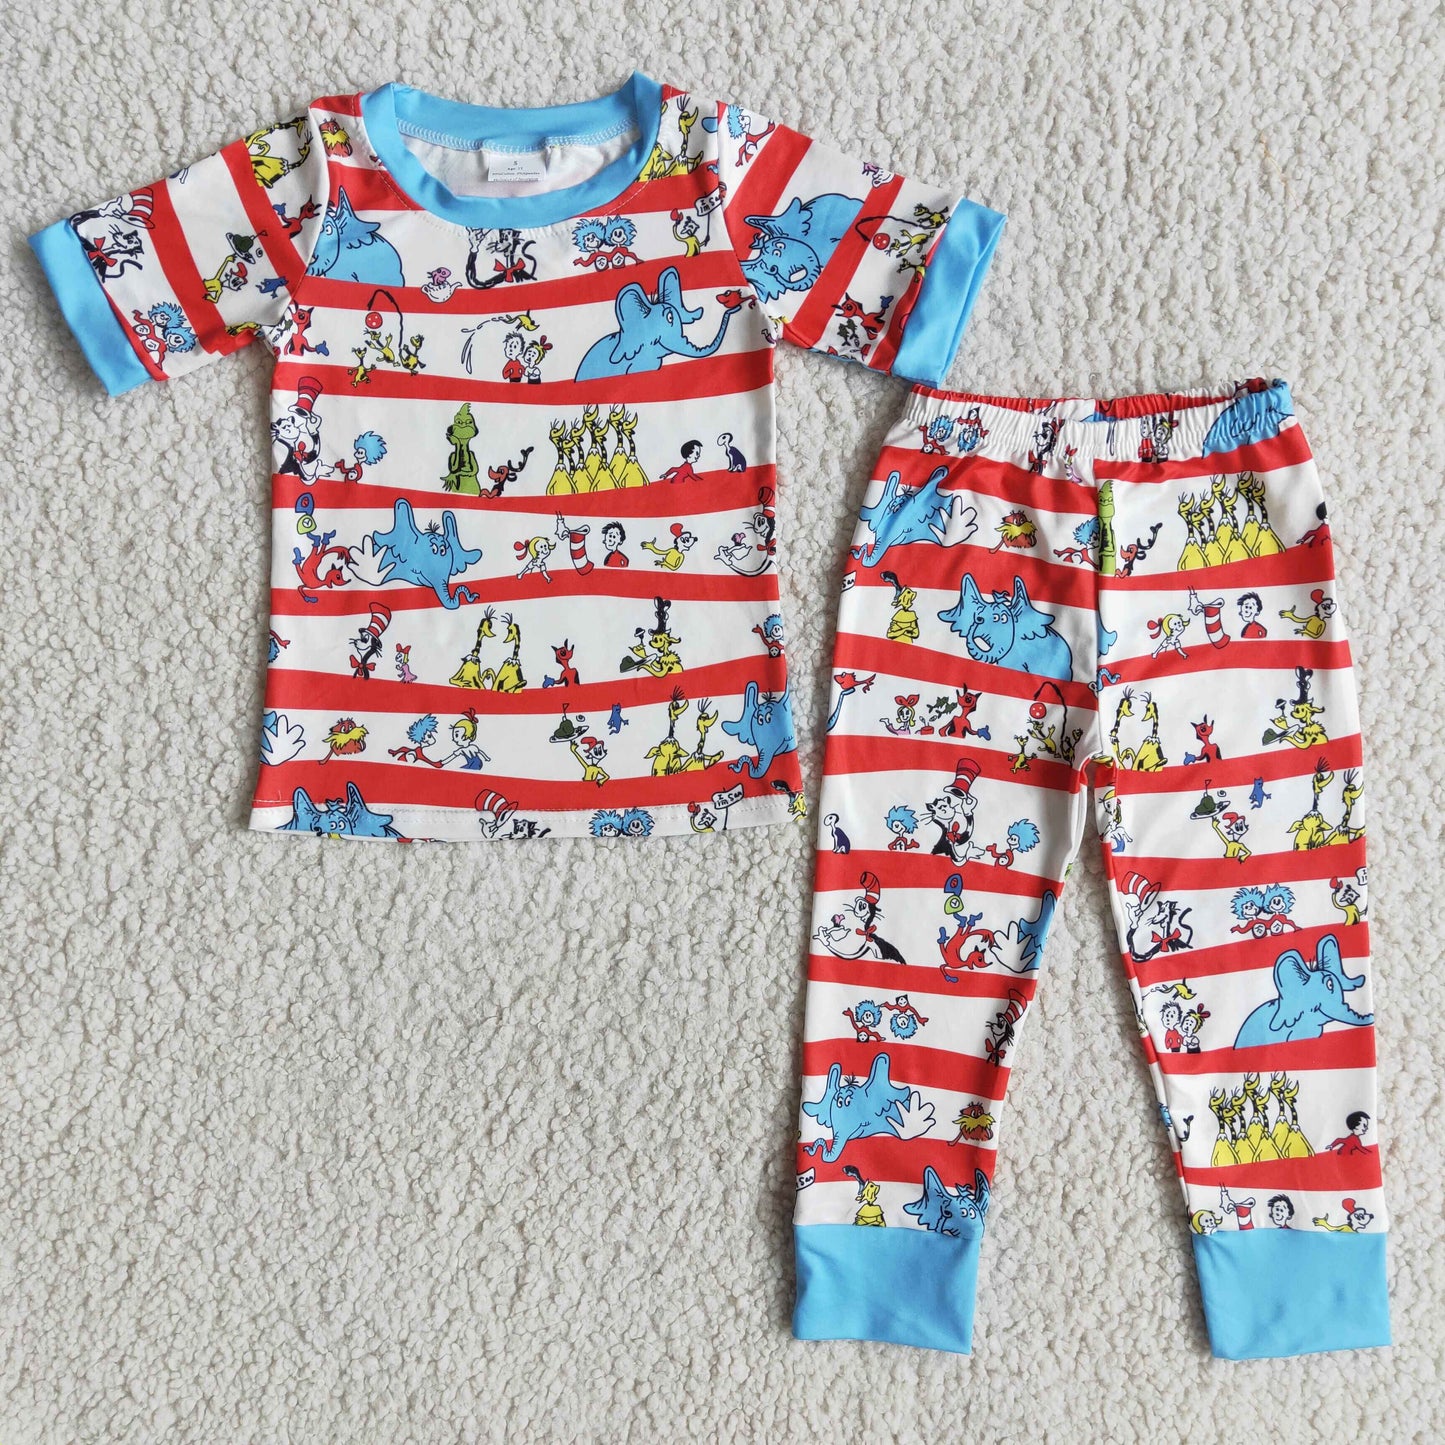 Cat in the hat girl's outfit ruffle pajamas